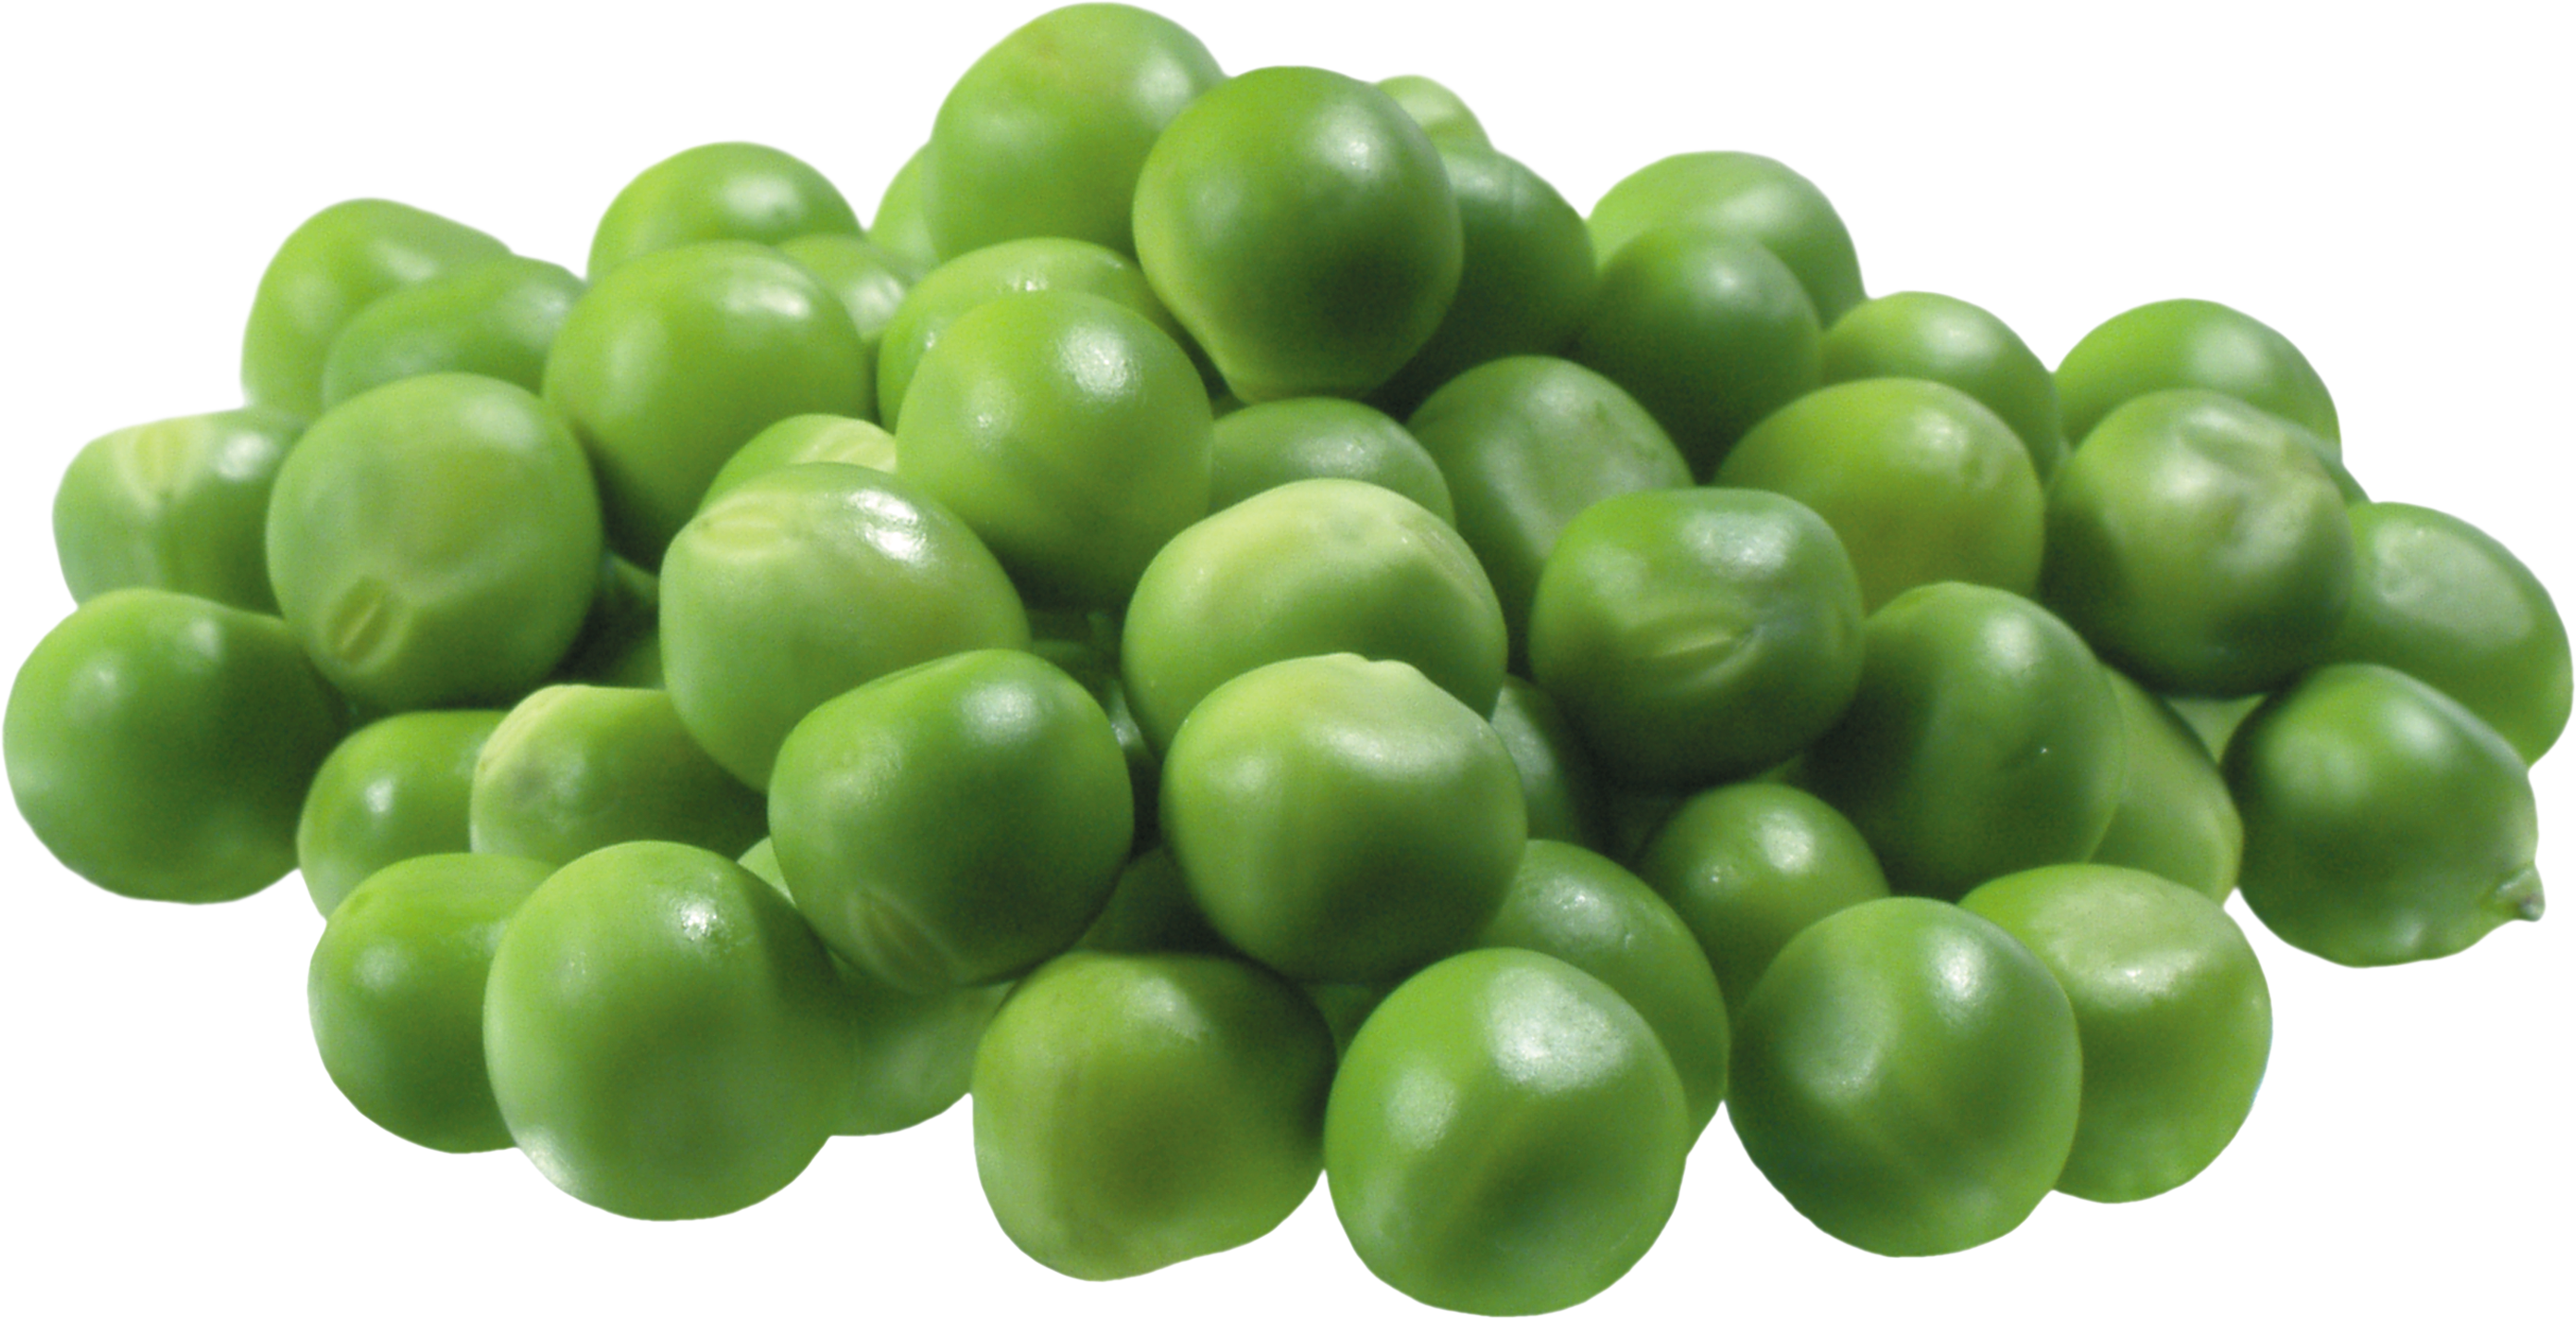 Peas without Pods